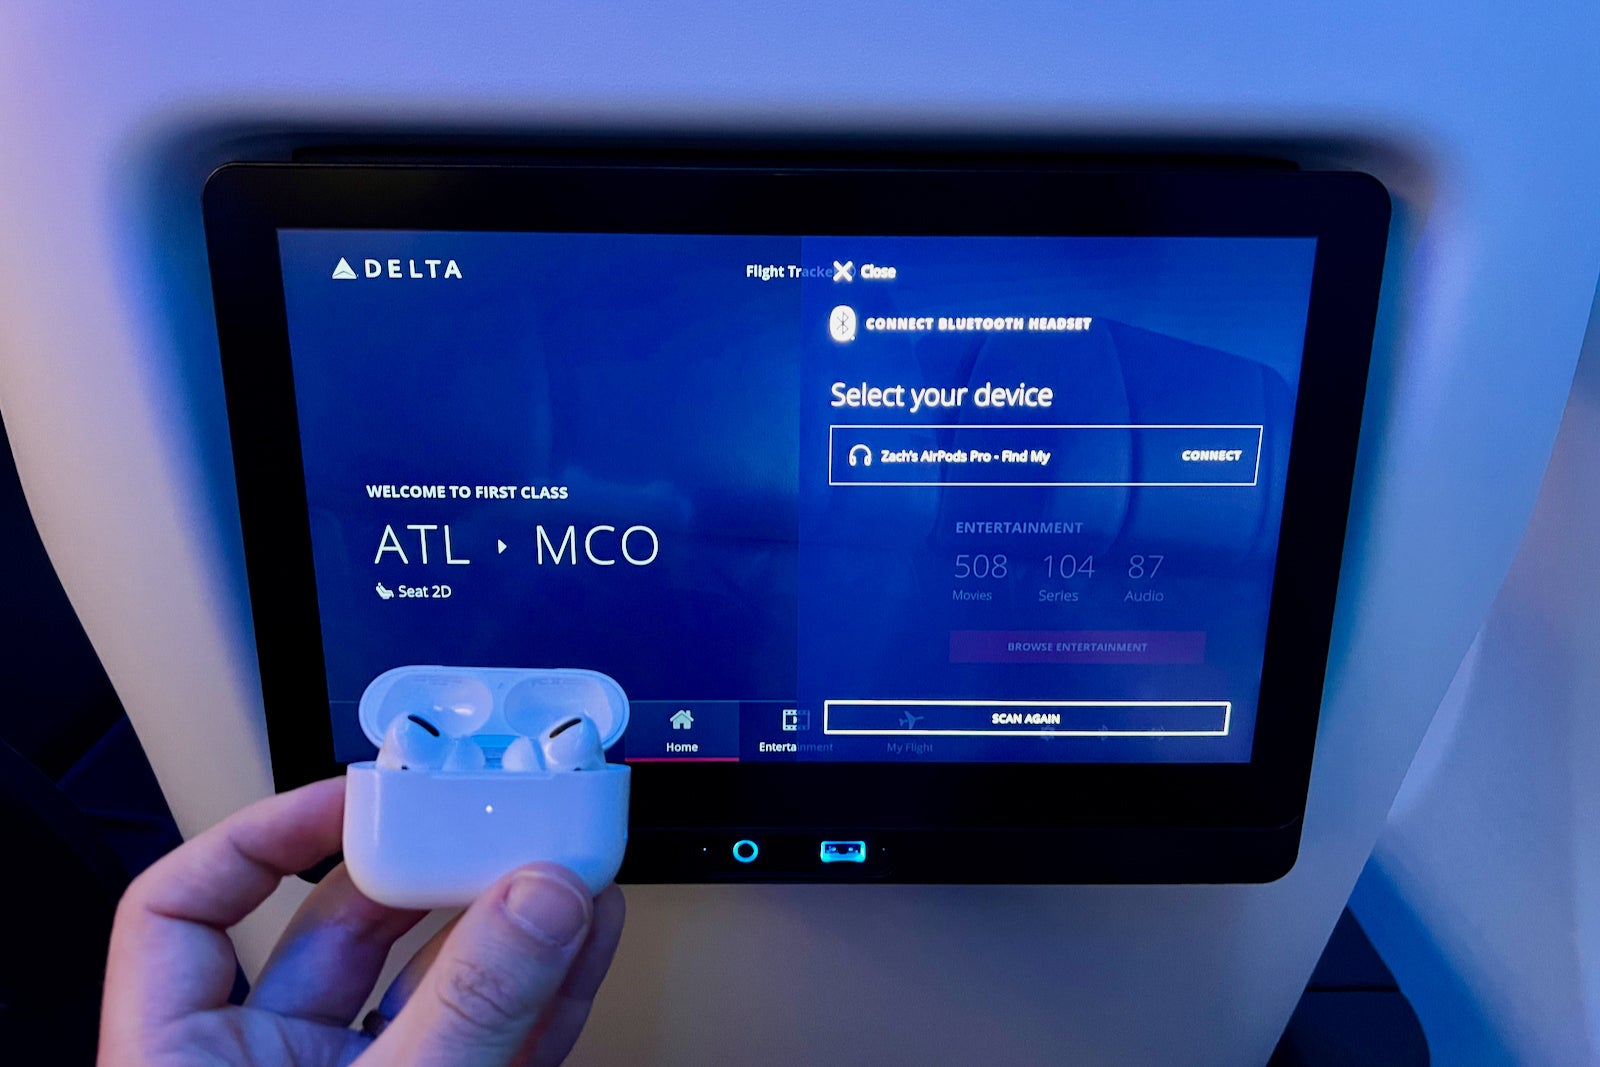 AirFly Pairs Your Wireless Headphones with the In-Flight Entertainment  System